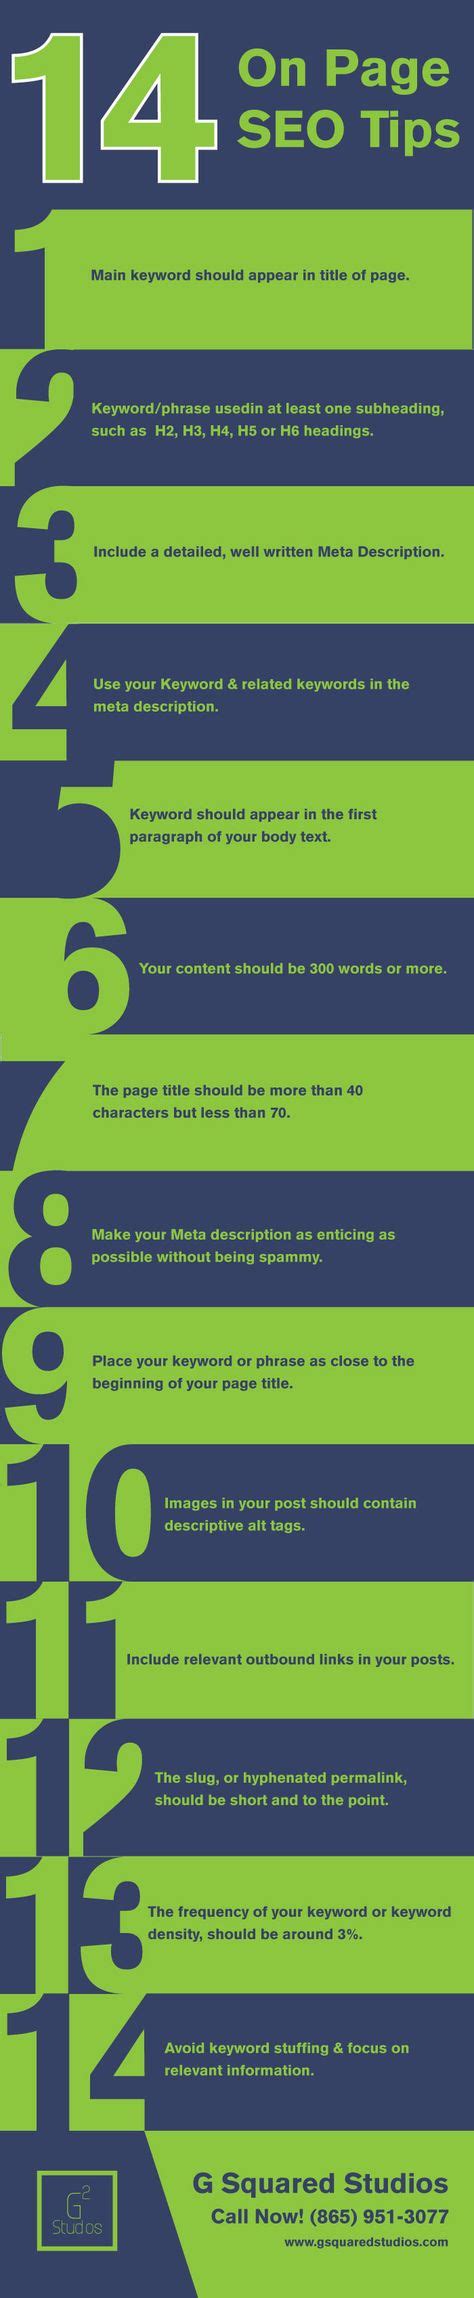 3 Quick Ways You Can Improve Search Engine Results Seo Infographic